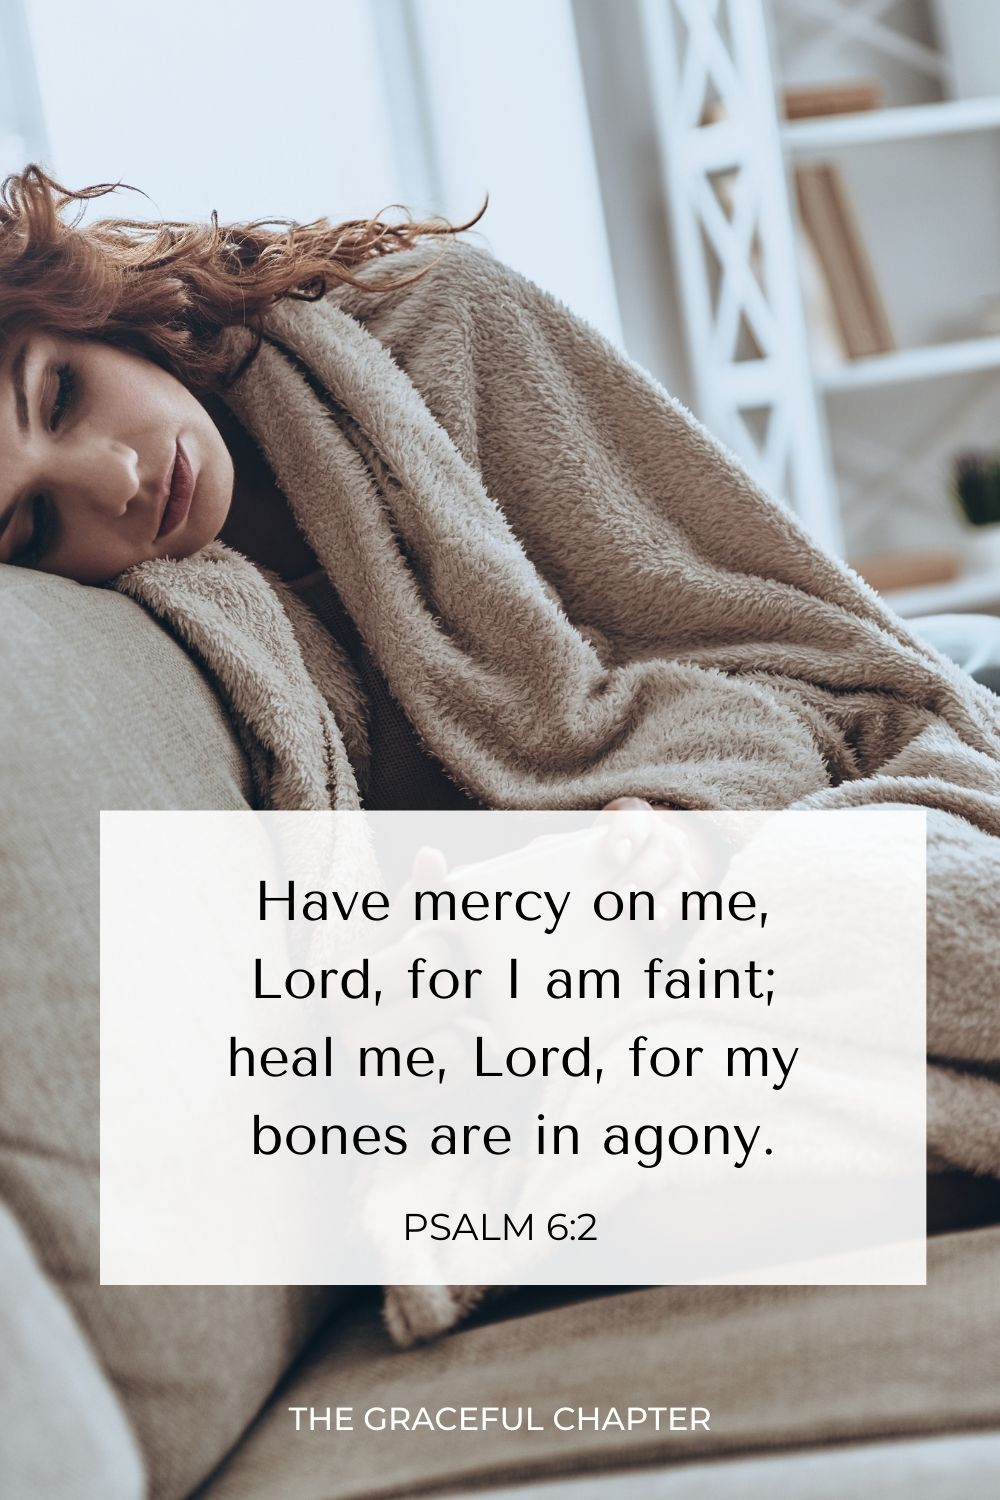 Have mercy on me, Lord, for I am faint; heal me, Lord, for my bones are in agony. Psalm 6:2